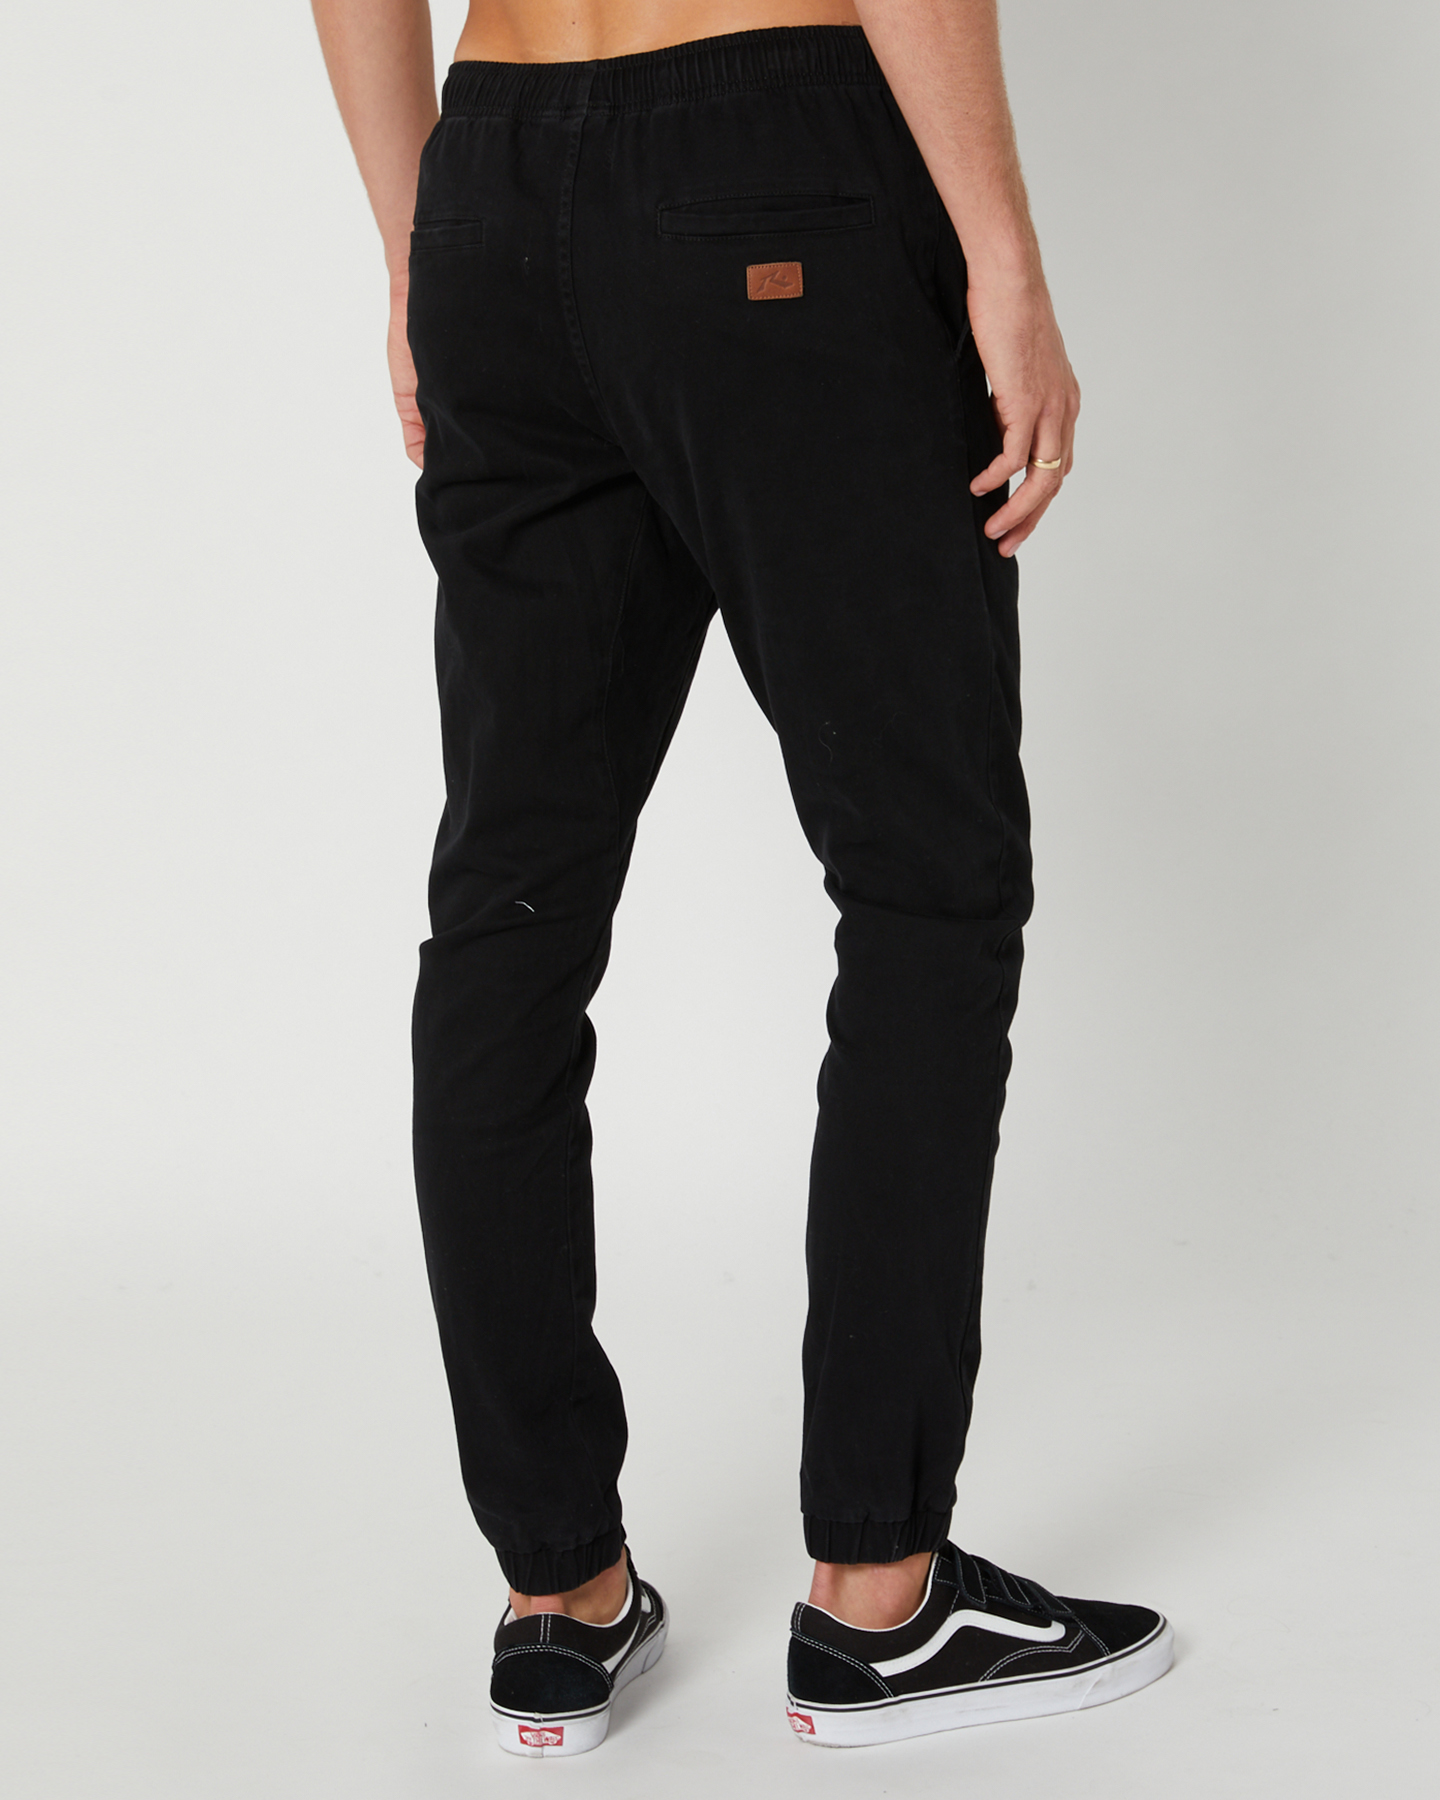 Rusty Hook Out Mens Jogger Pant - Black | SurfStitch